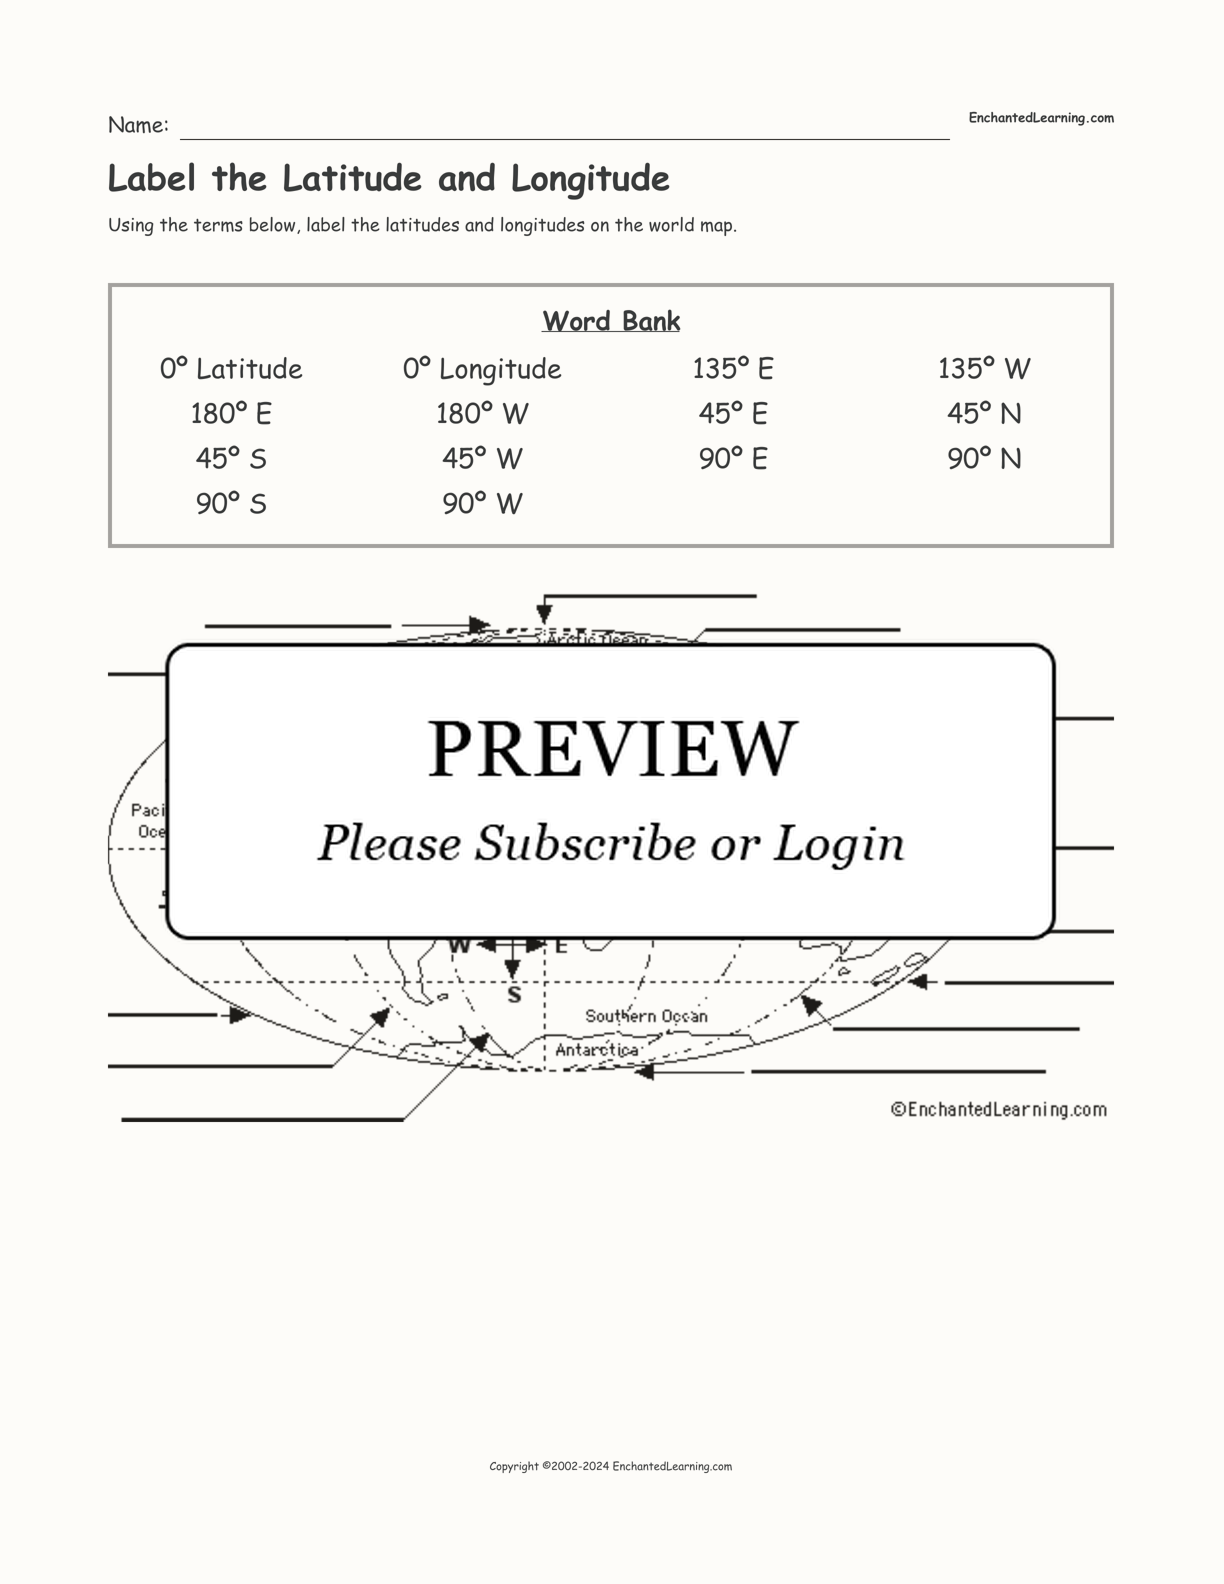 Label the Latitude and Longitude interactive worksheet page 1